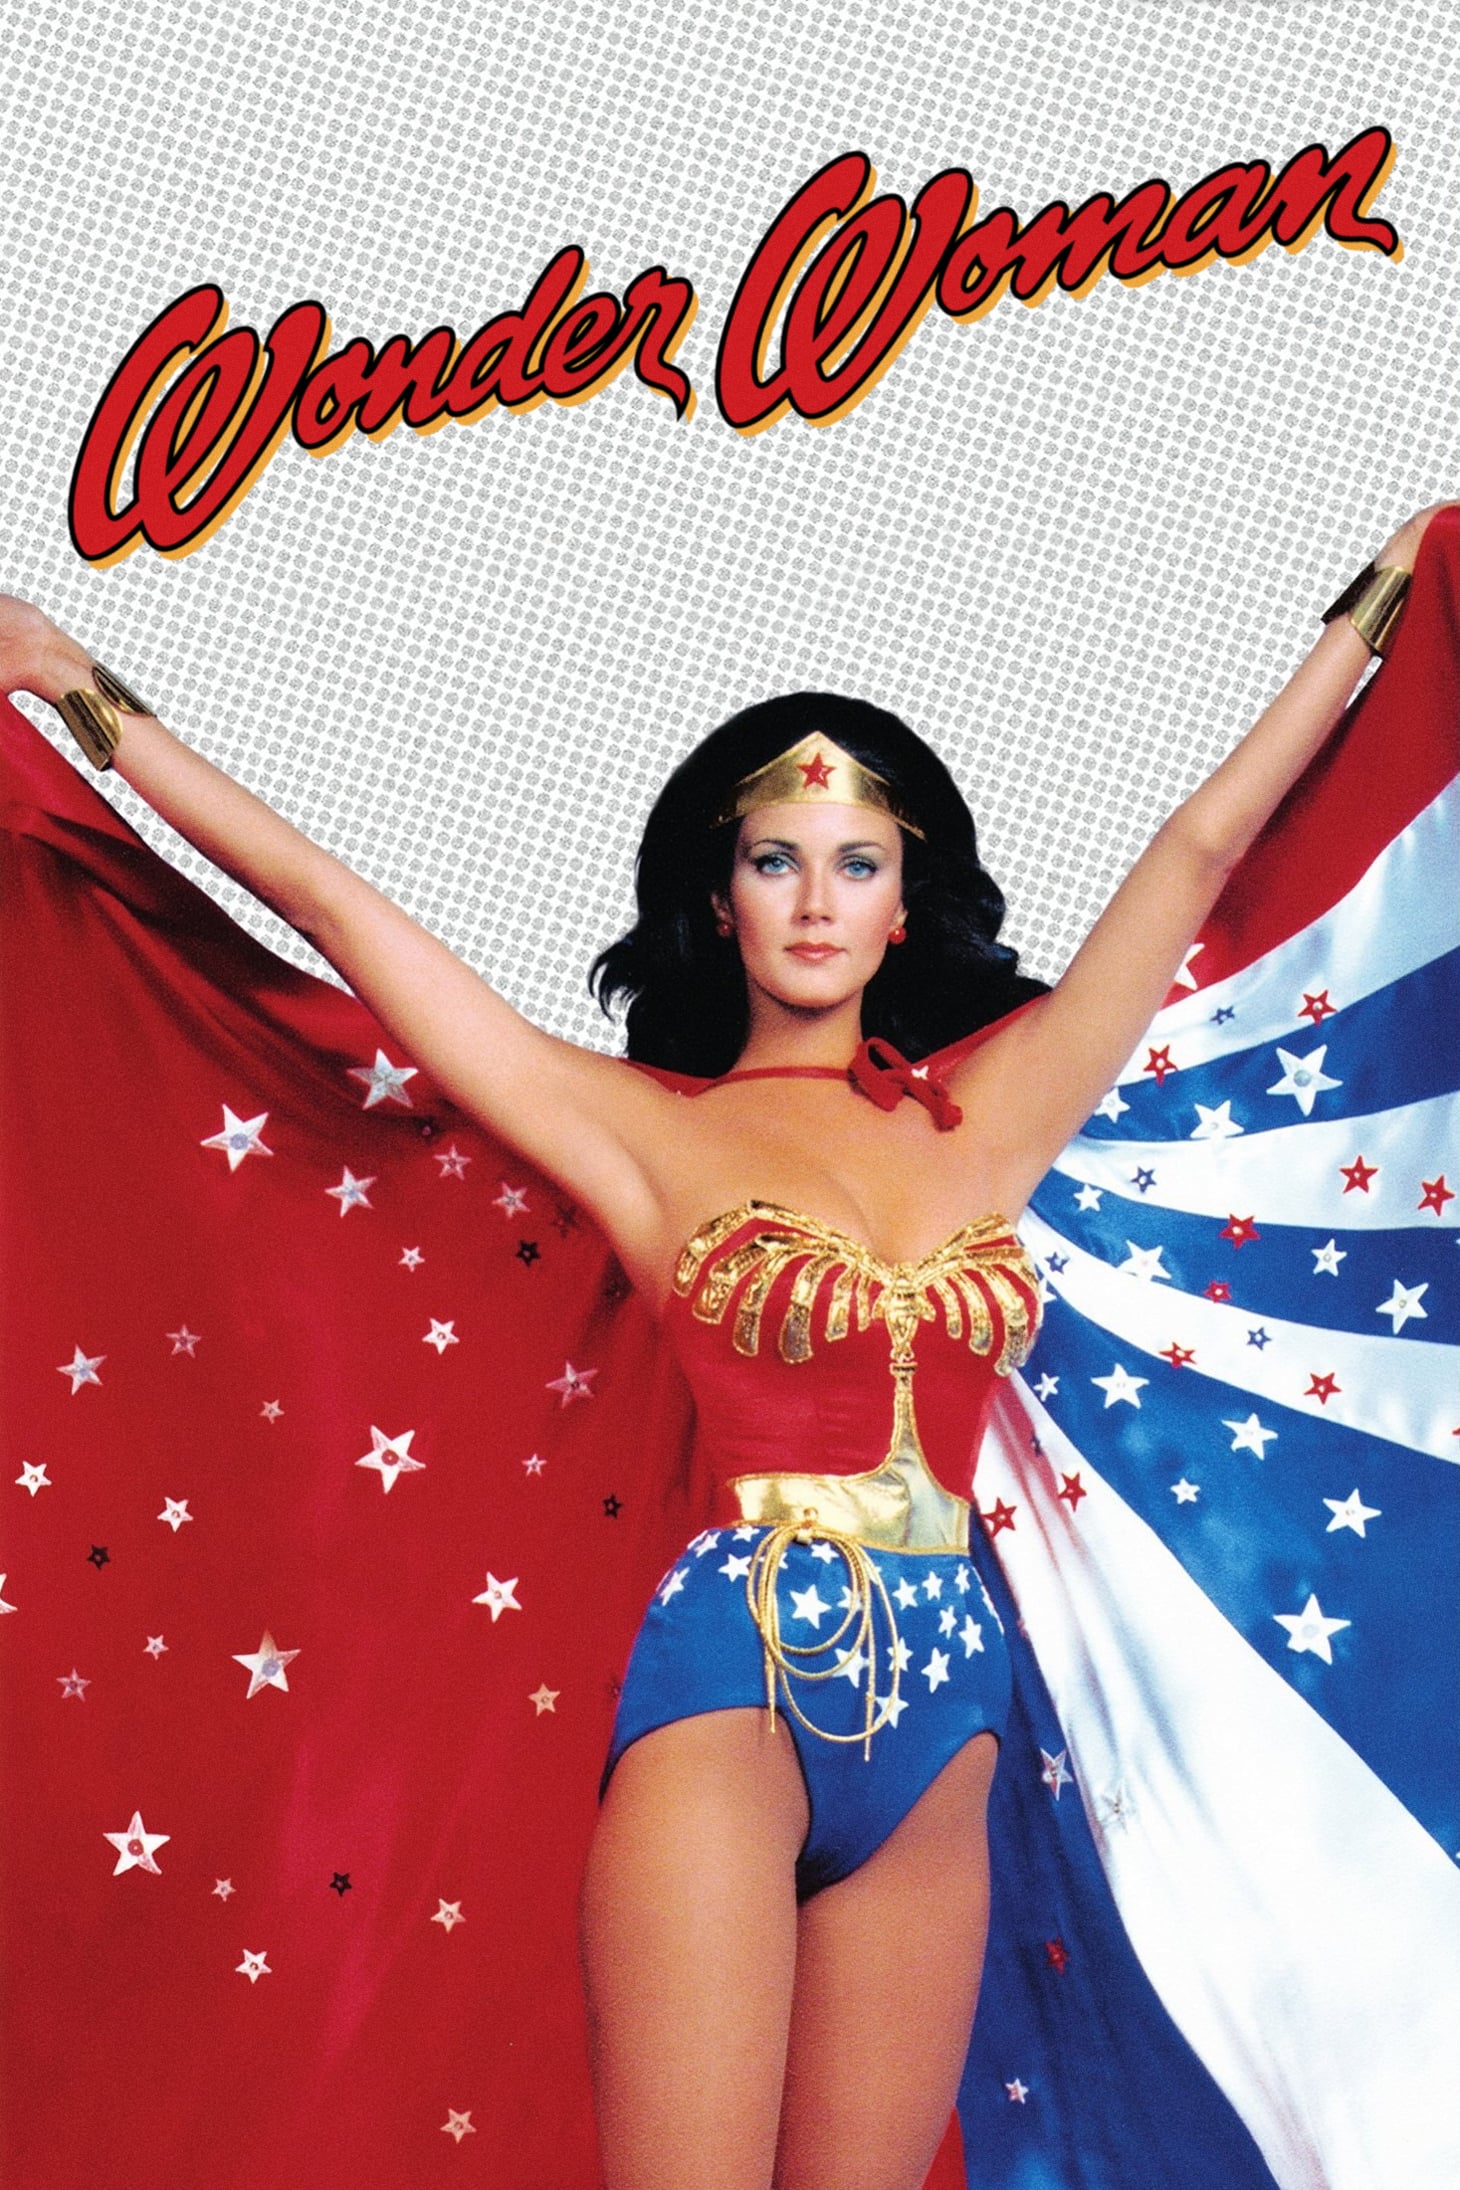 Wonder Woman (1975) Picture